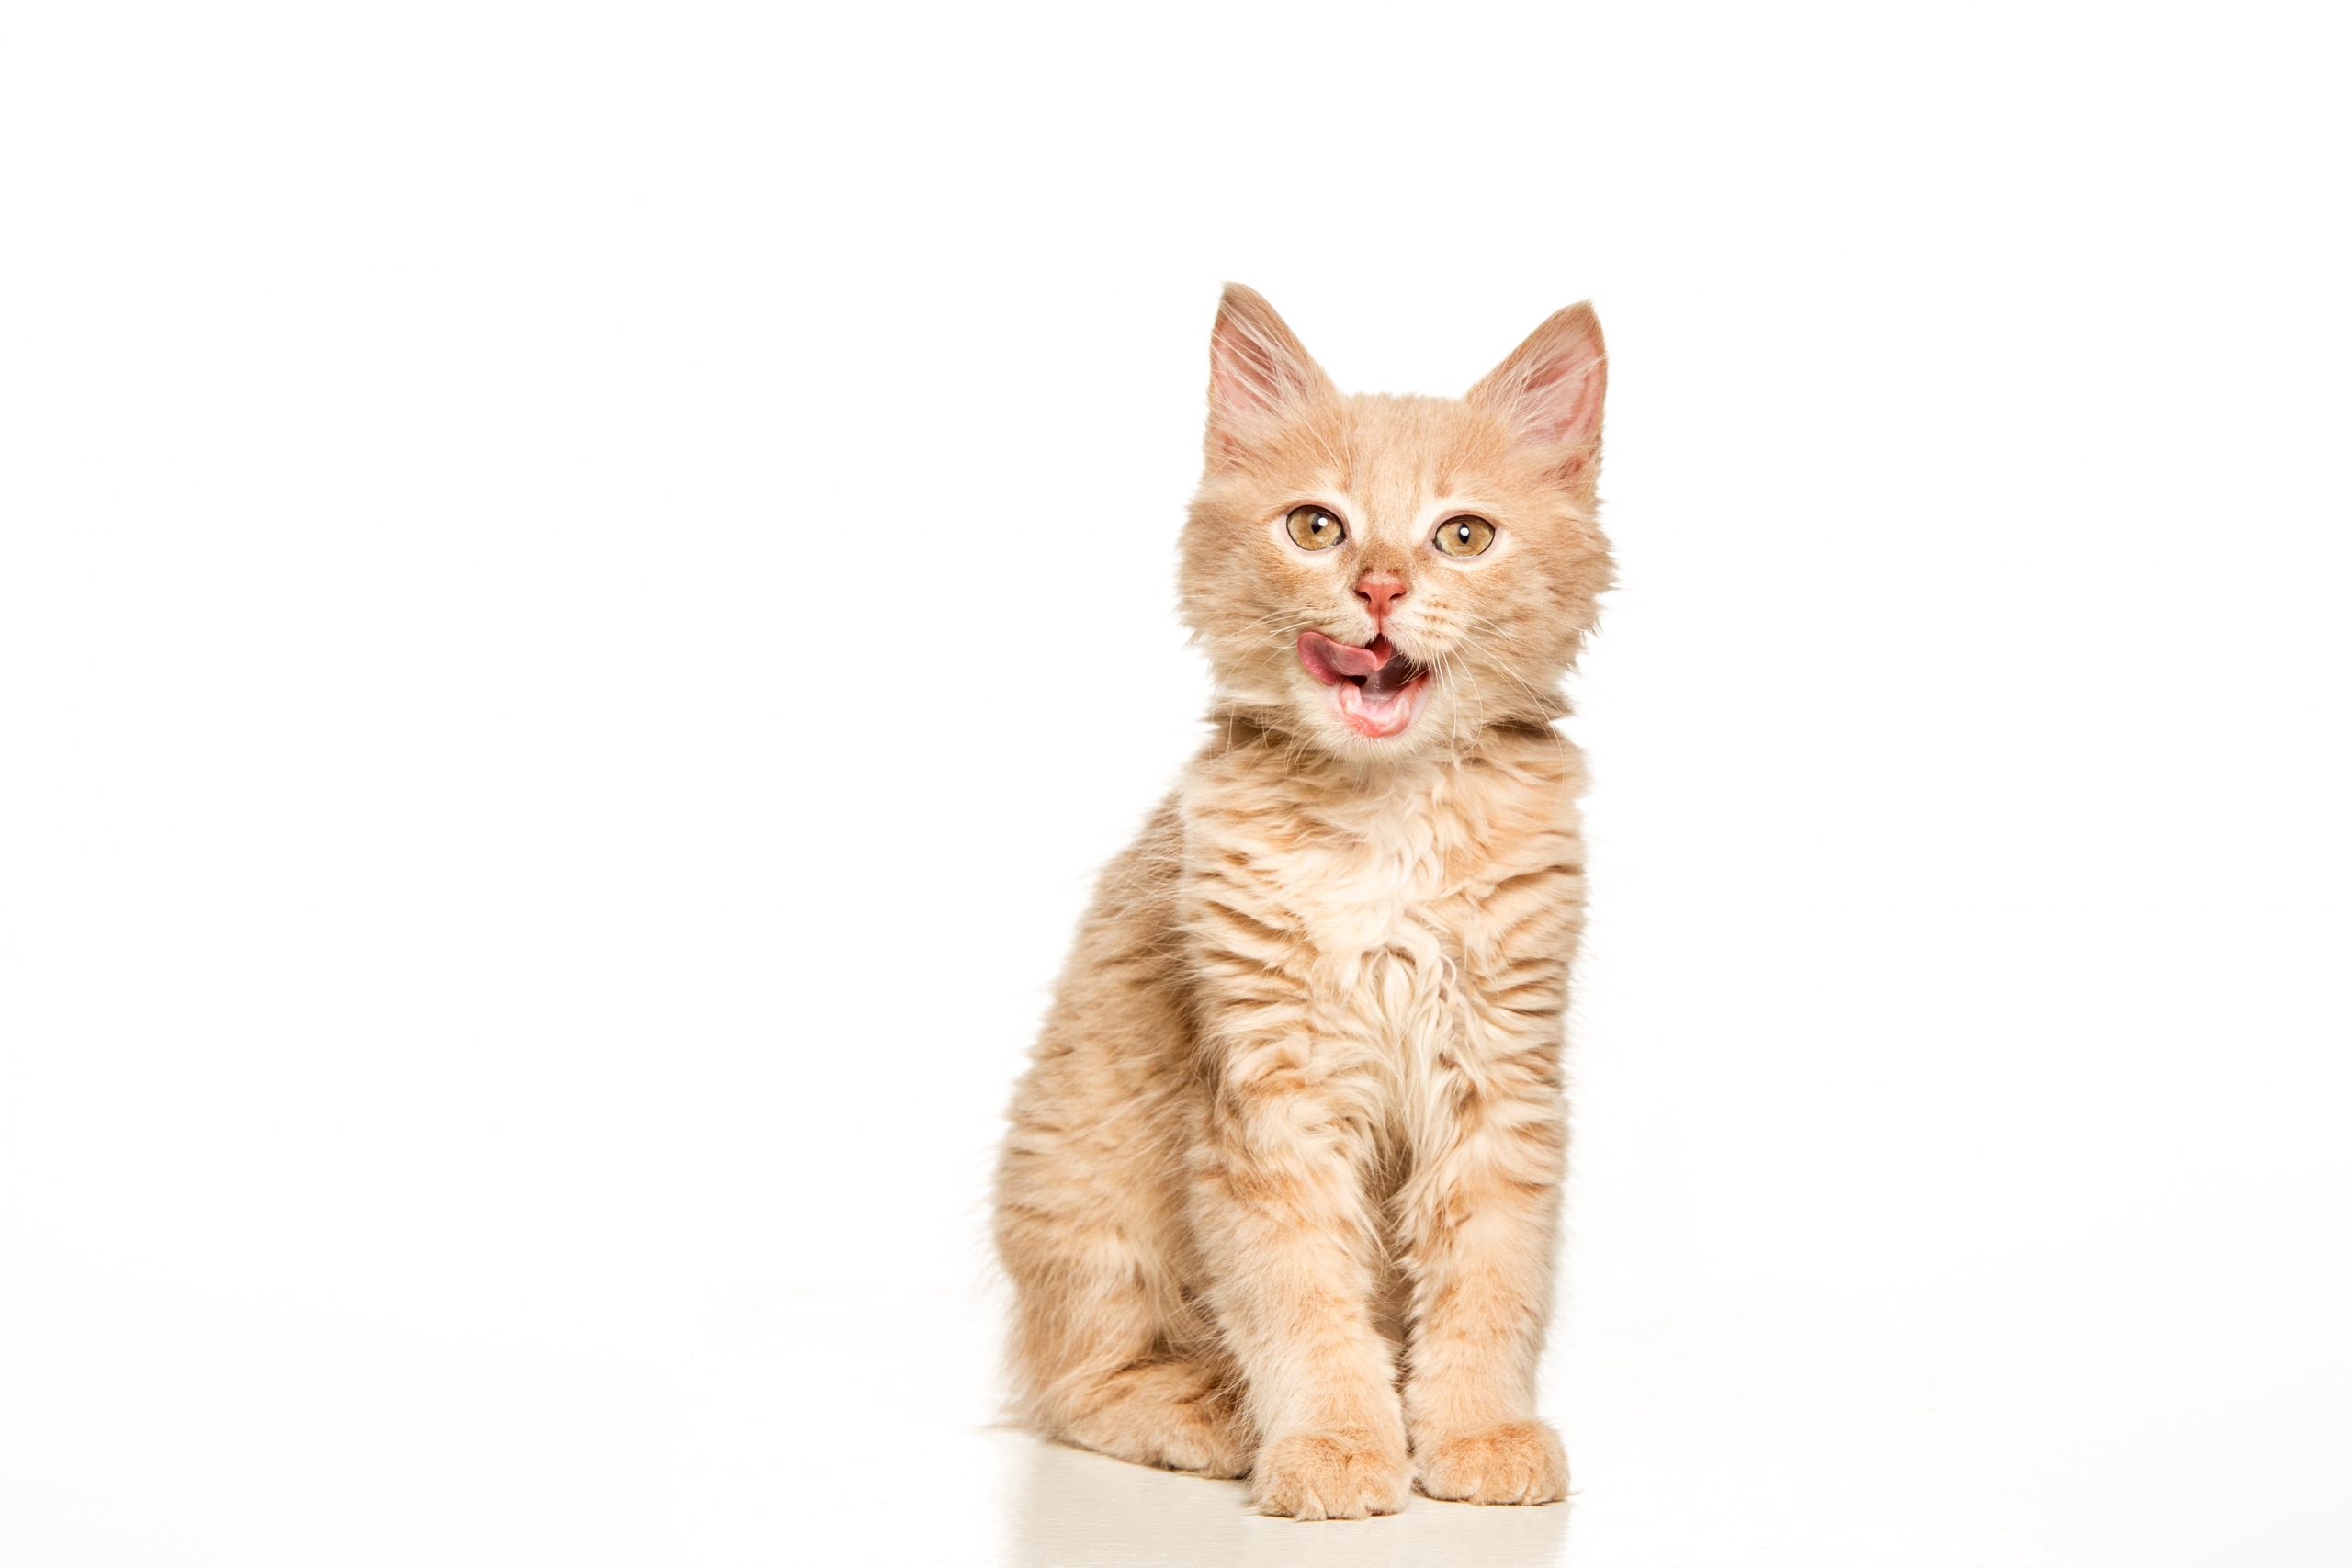 the cat on white background scaled